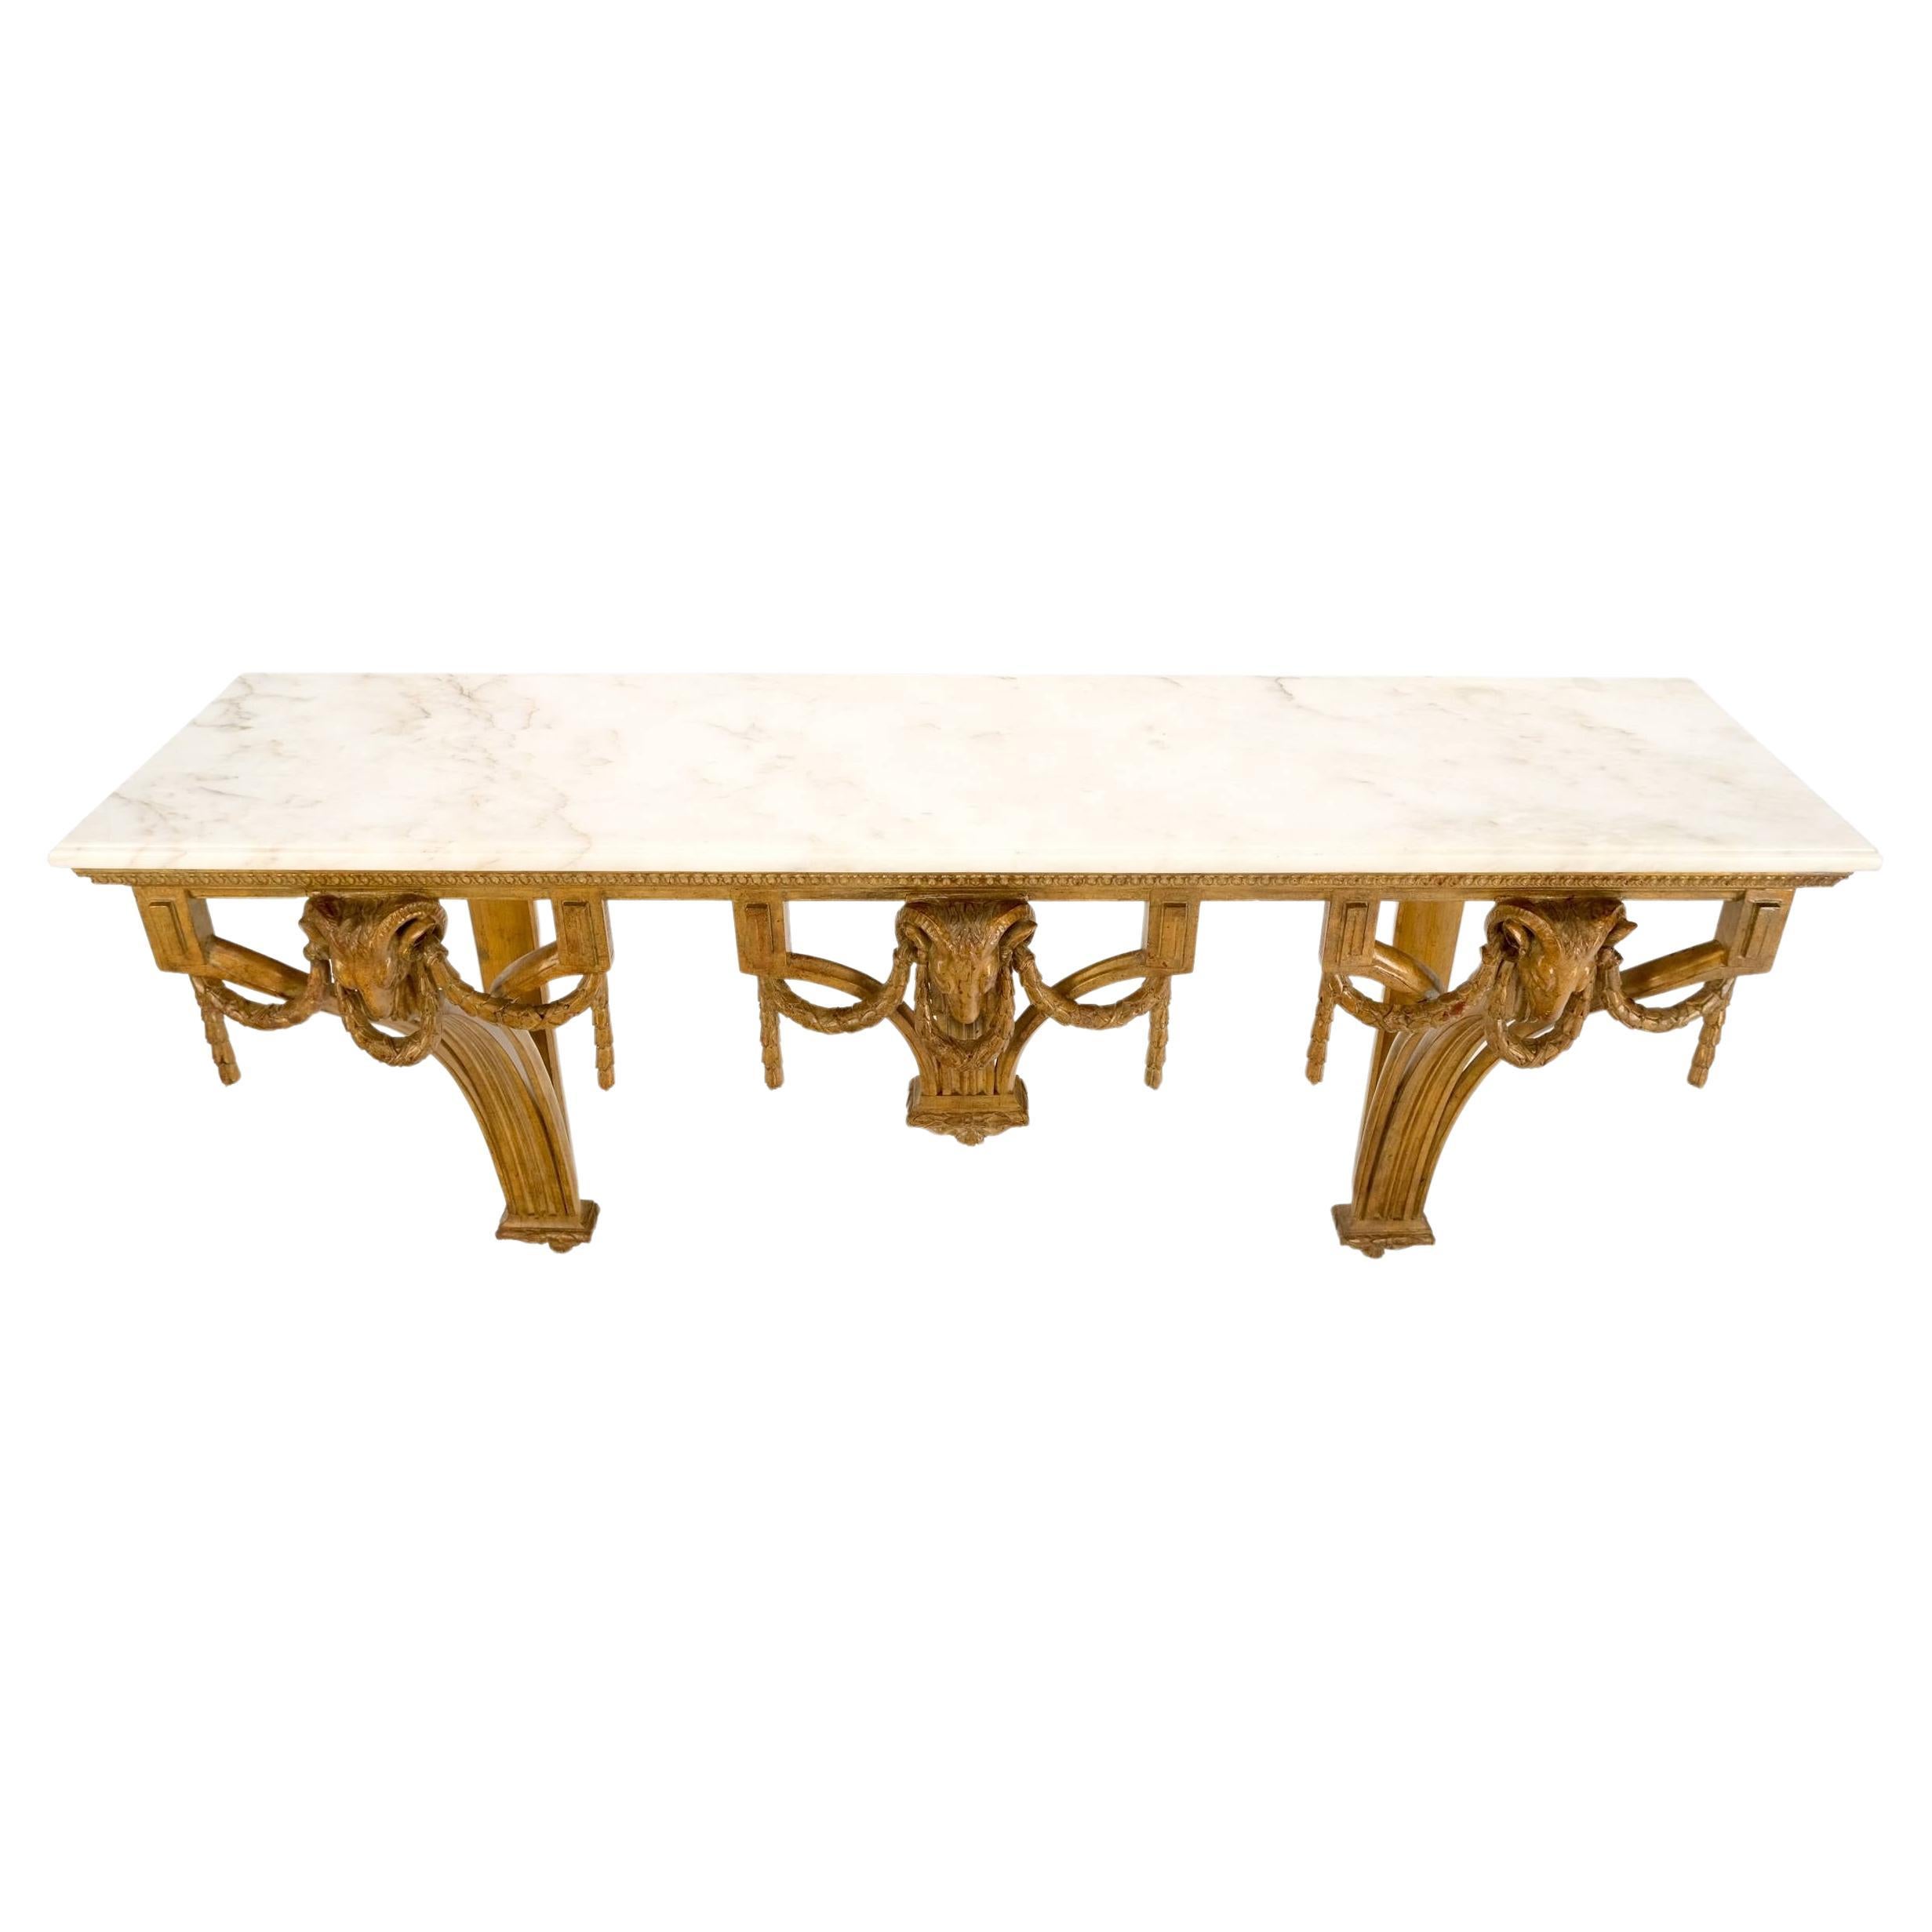 Rococo Revival Hanging Fine Carved Antique Gold Gilt Base Marble Top Console Table Credenza For Sale